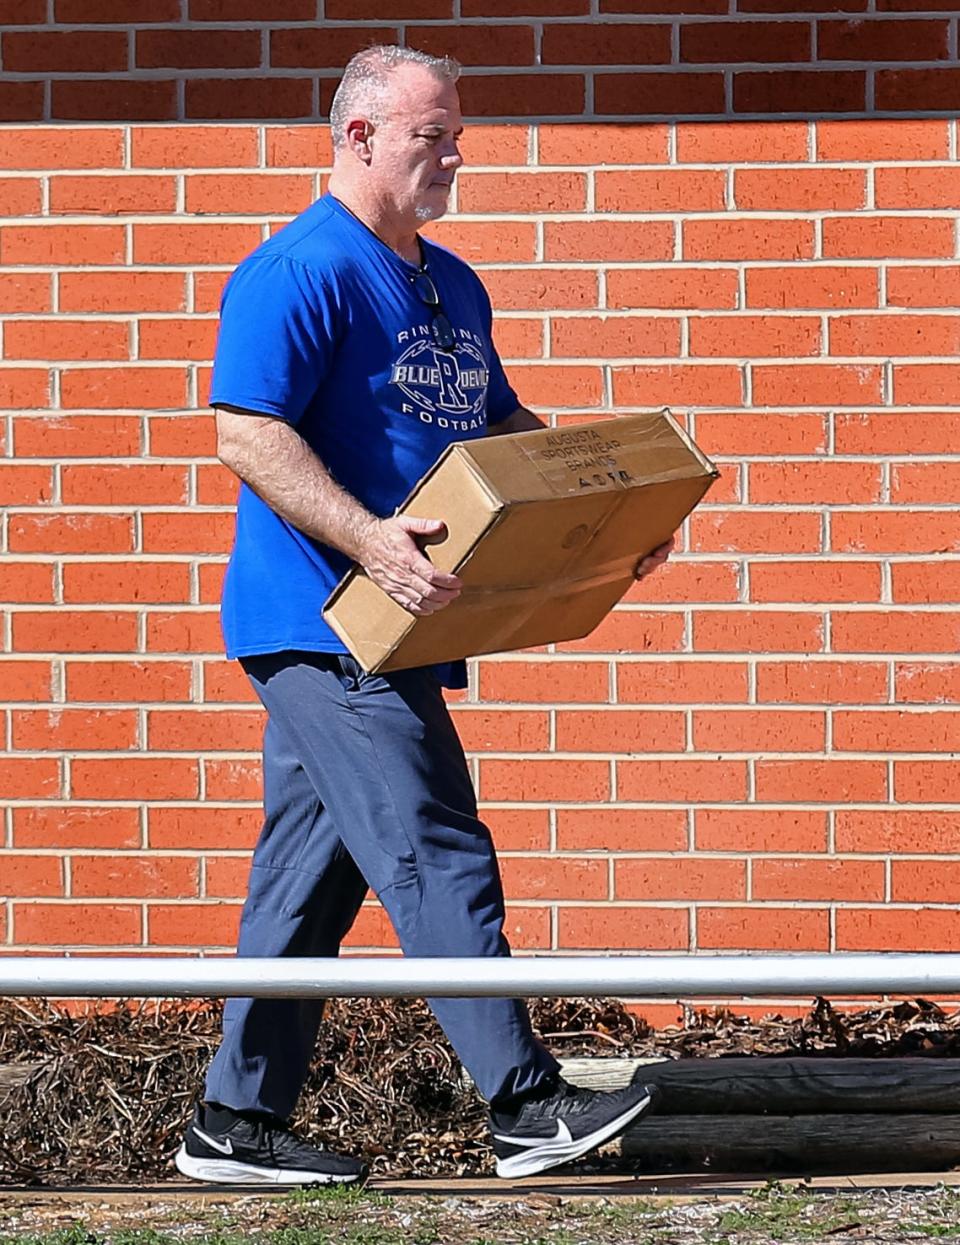 Philip Koons, Ringling High School football coach and principal, walks out of the district office on Feb. 22, hours before the district announced that he had been suspended amid reports that he mistreated players.